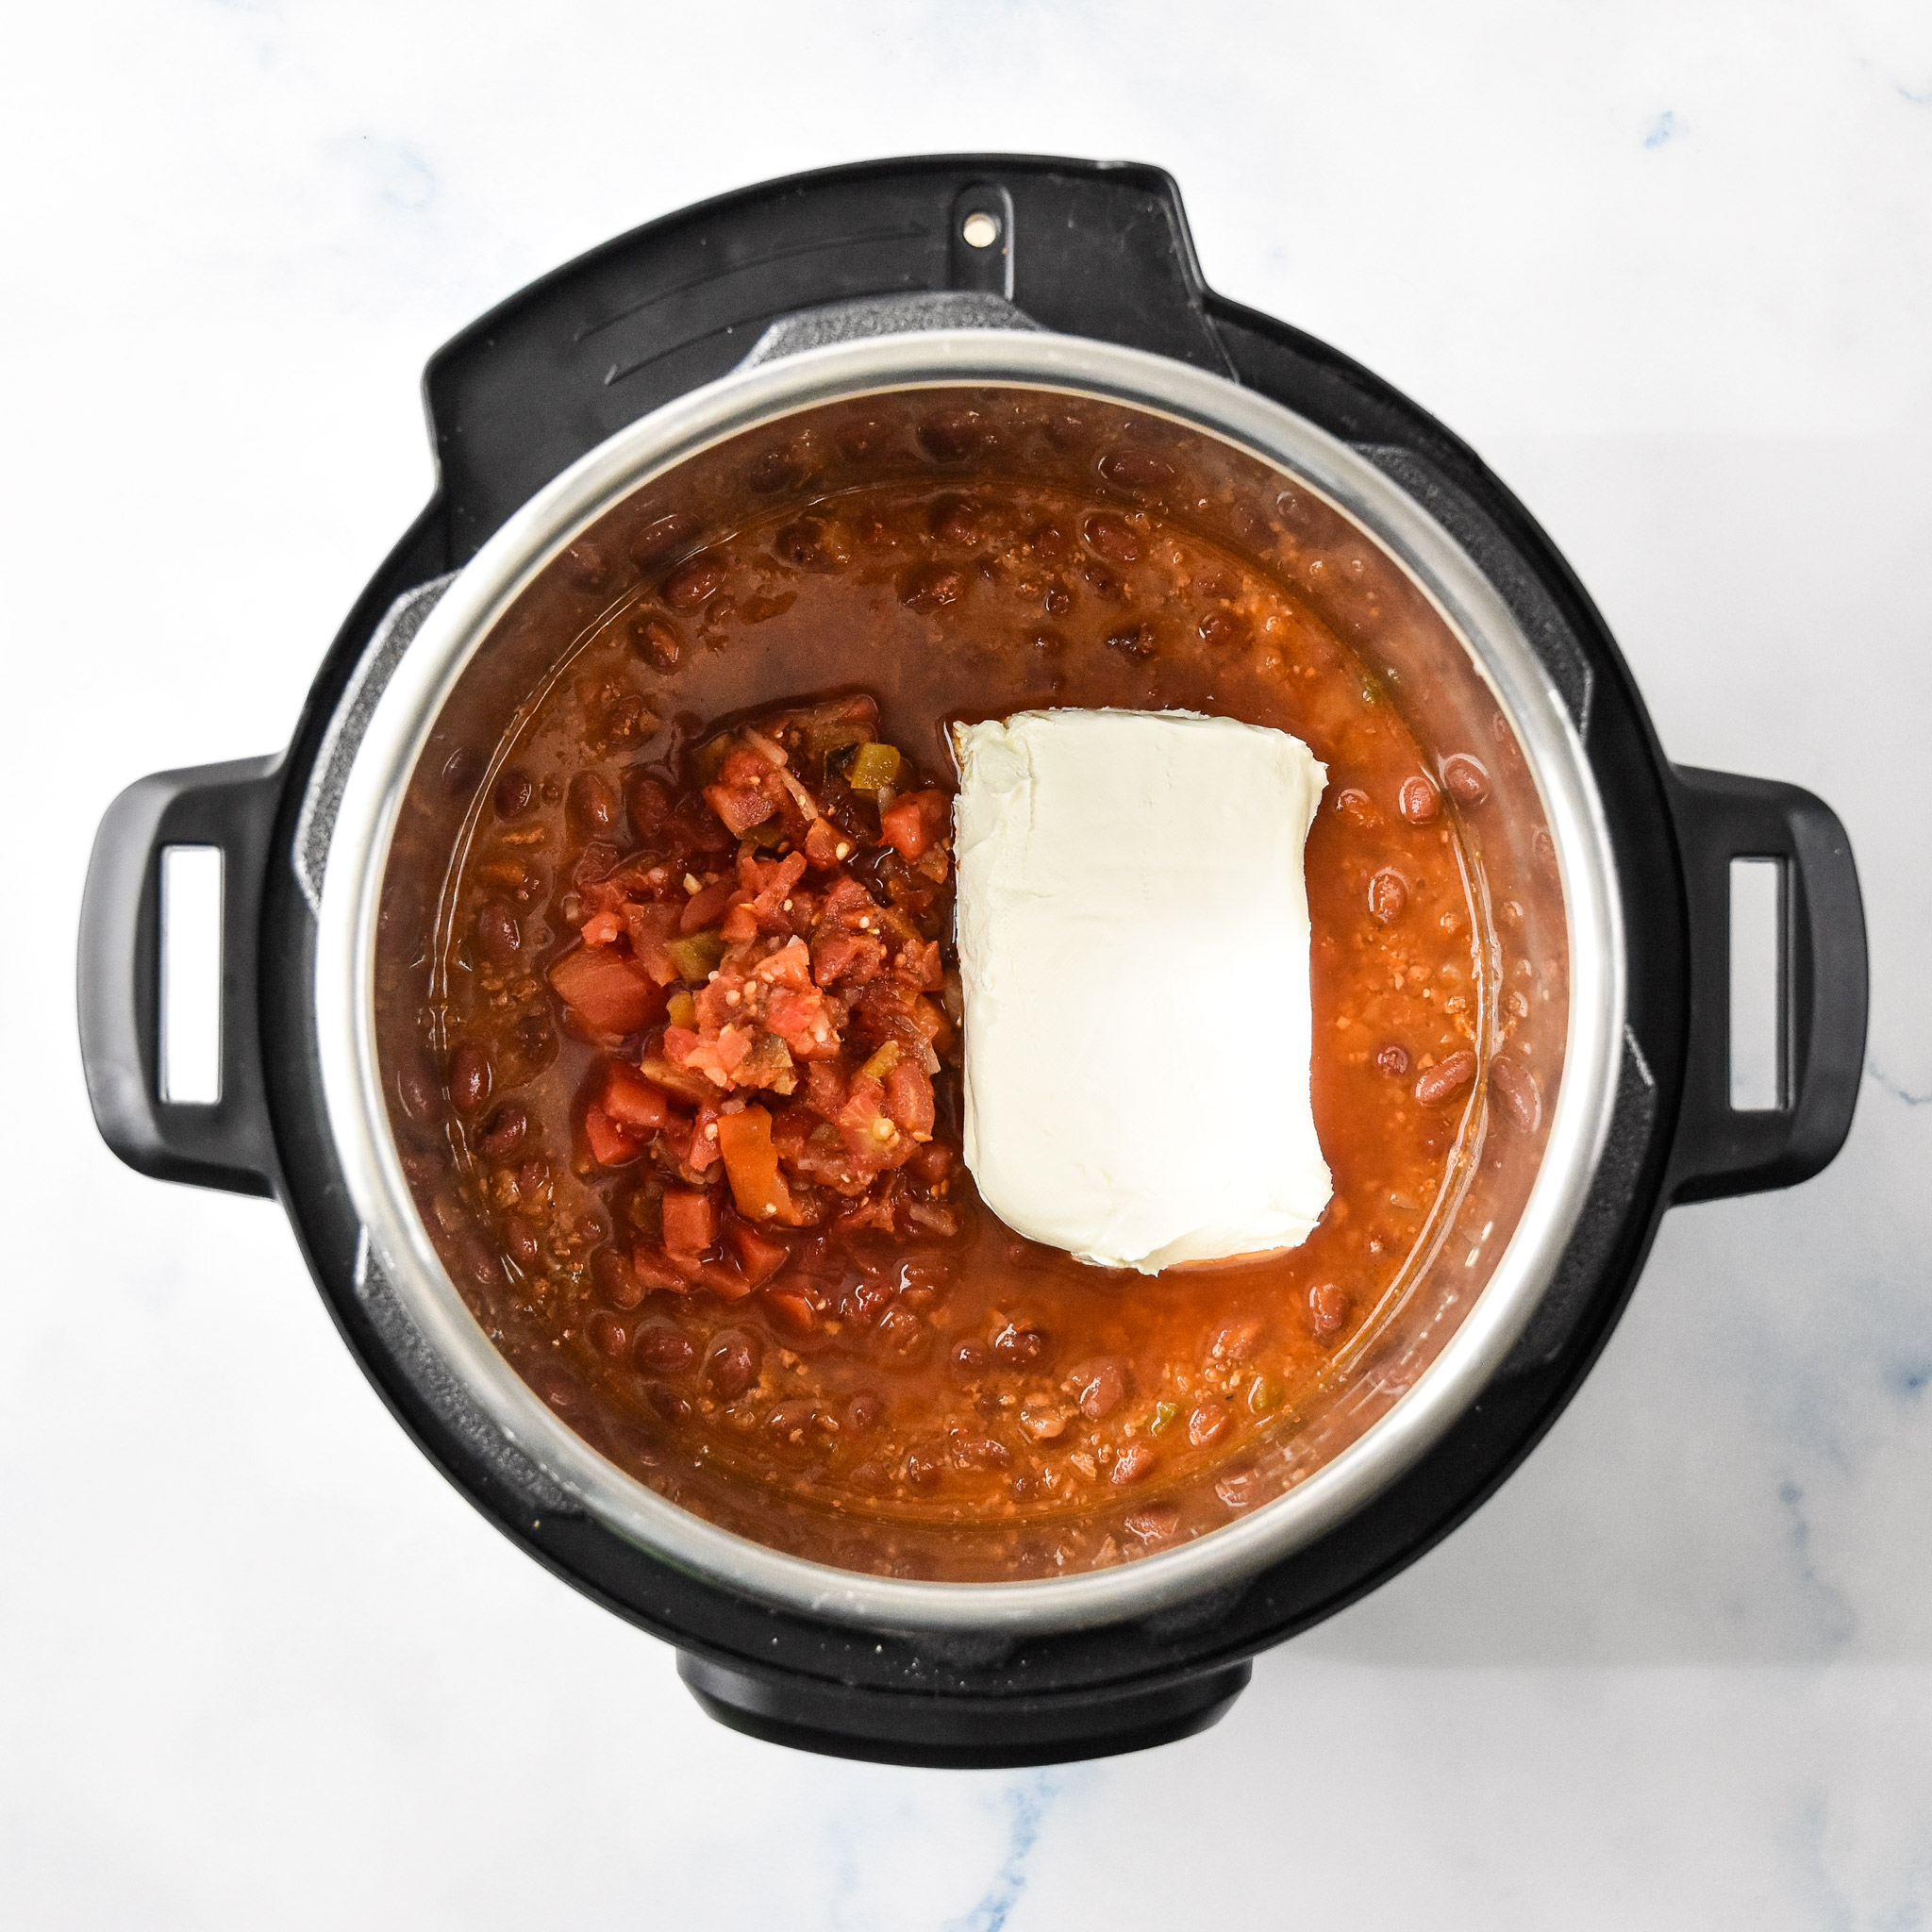 ingredients in the chili cheese dip in the instant pot